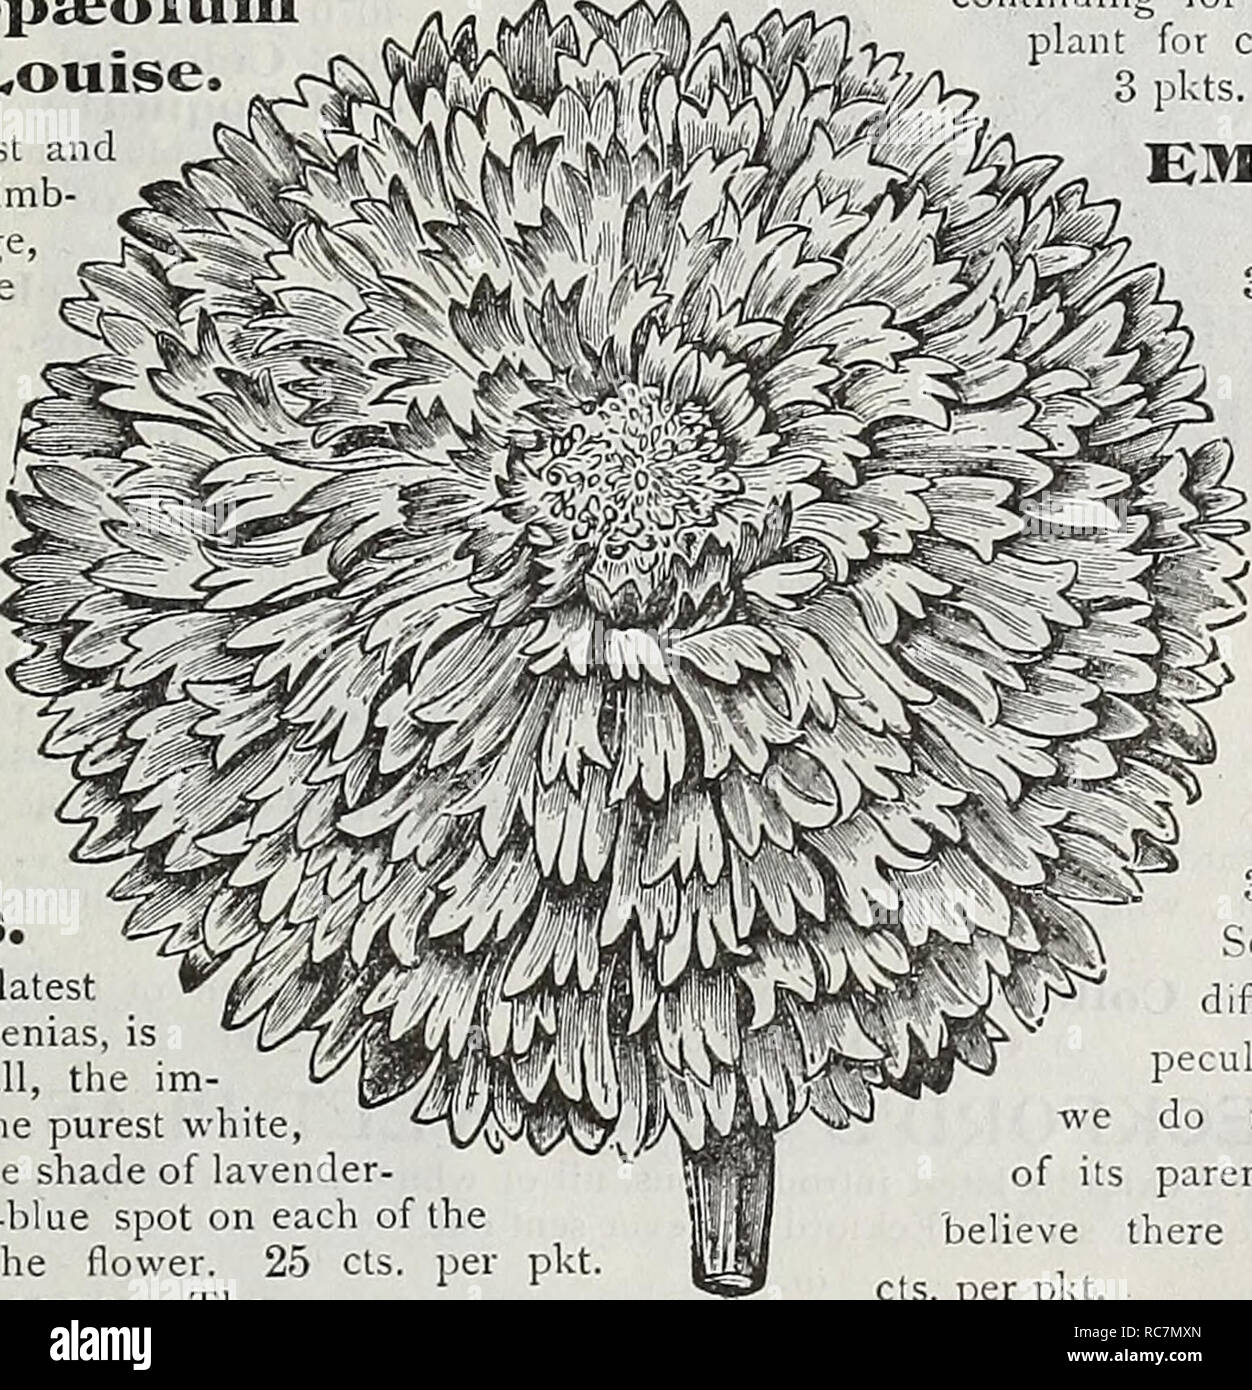 . Dreer's garden calendar : 1900. Seeds Catalogs; Nursery stock Catalogs; Gardening Equipment and supplies Catalogs; Flowers Seeds Catalogs; Vegetables Seeds Catalogs; Fruit Seeds Catalogs. TropiEOLum Princess Victohia Louise. New Climbing Tropaeolum Princess Victoria I^ouise ROYAI. BLUE FORGEX-ME-NOT. S'239 This beautiful variety belongs to the pillar-shaped section, of which a number of varieties have been sent out in the last few years. This novelty is a grand addition, the flowers being of larger size and a deeper blue than any otlier, and as a variety for pot culture is unexcelled. (See c Stock Photo